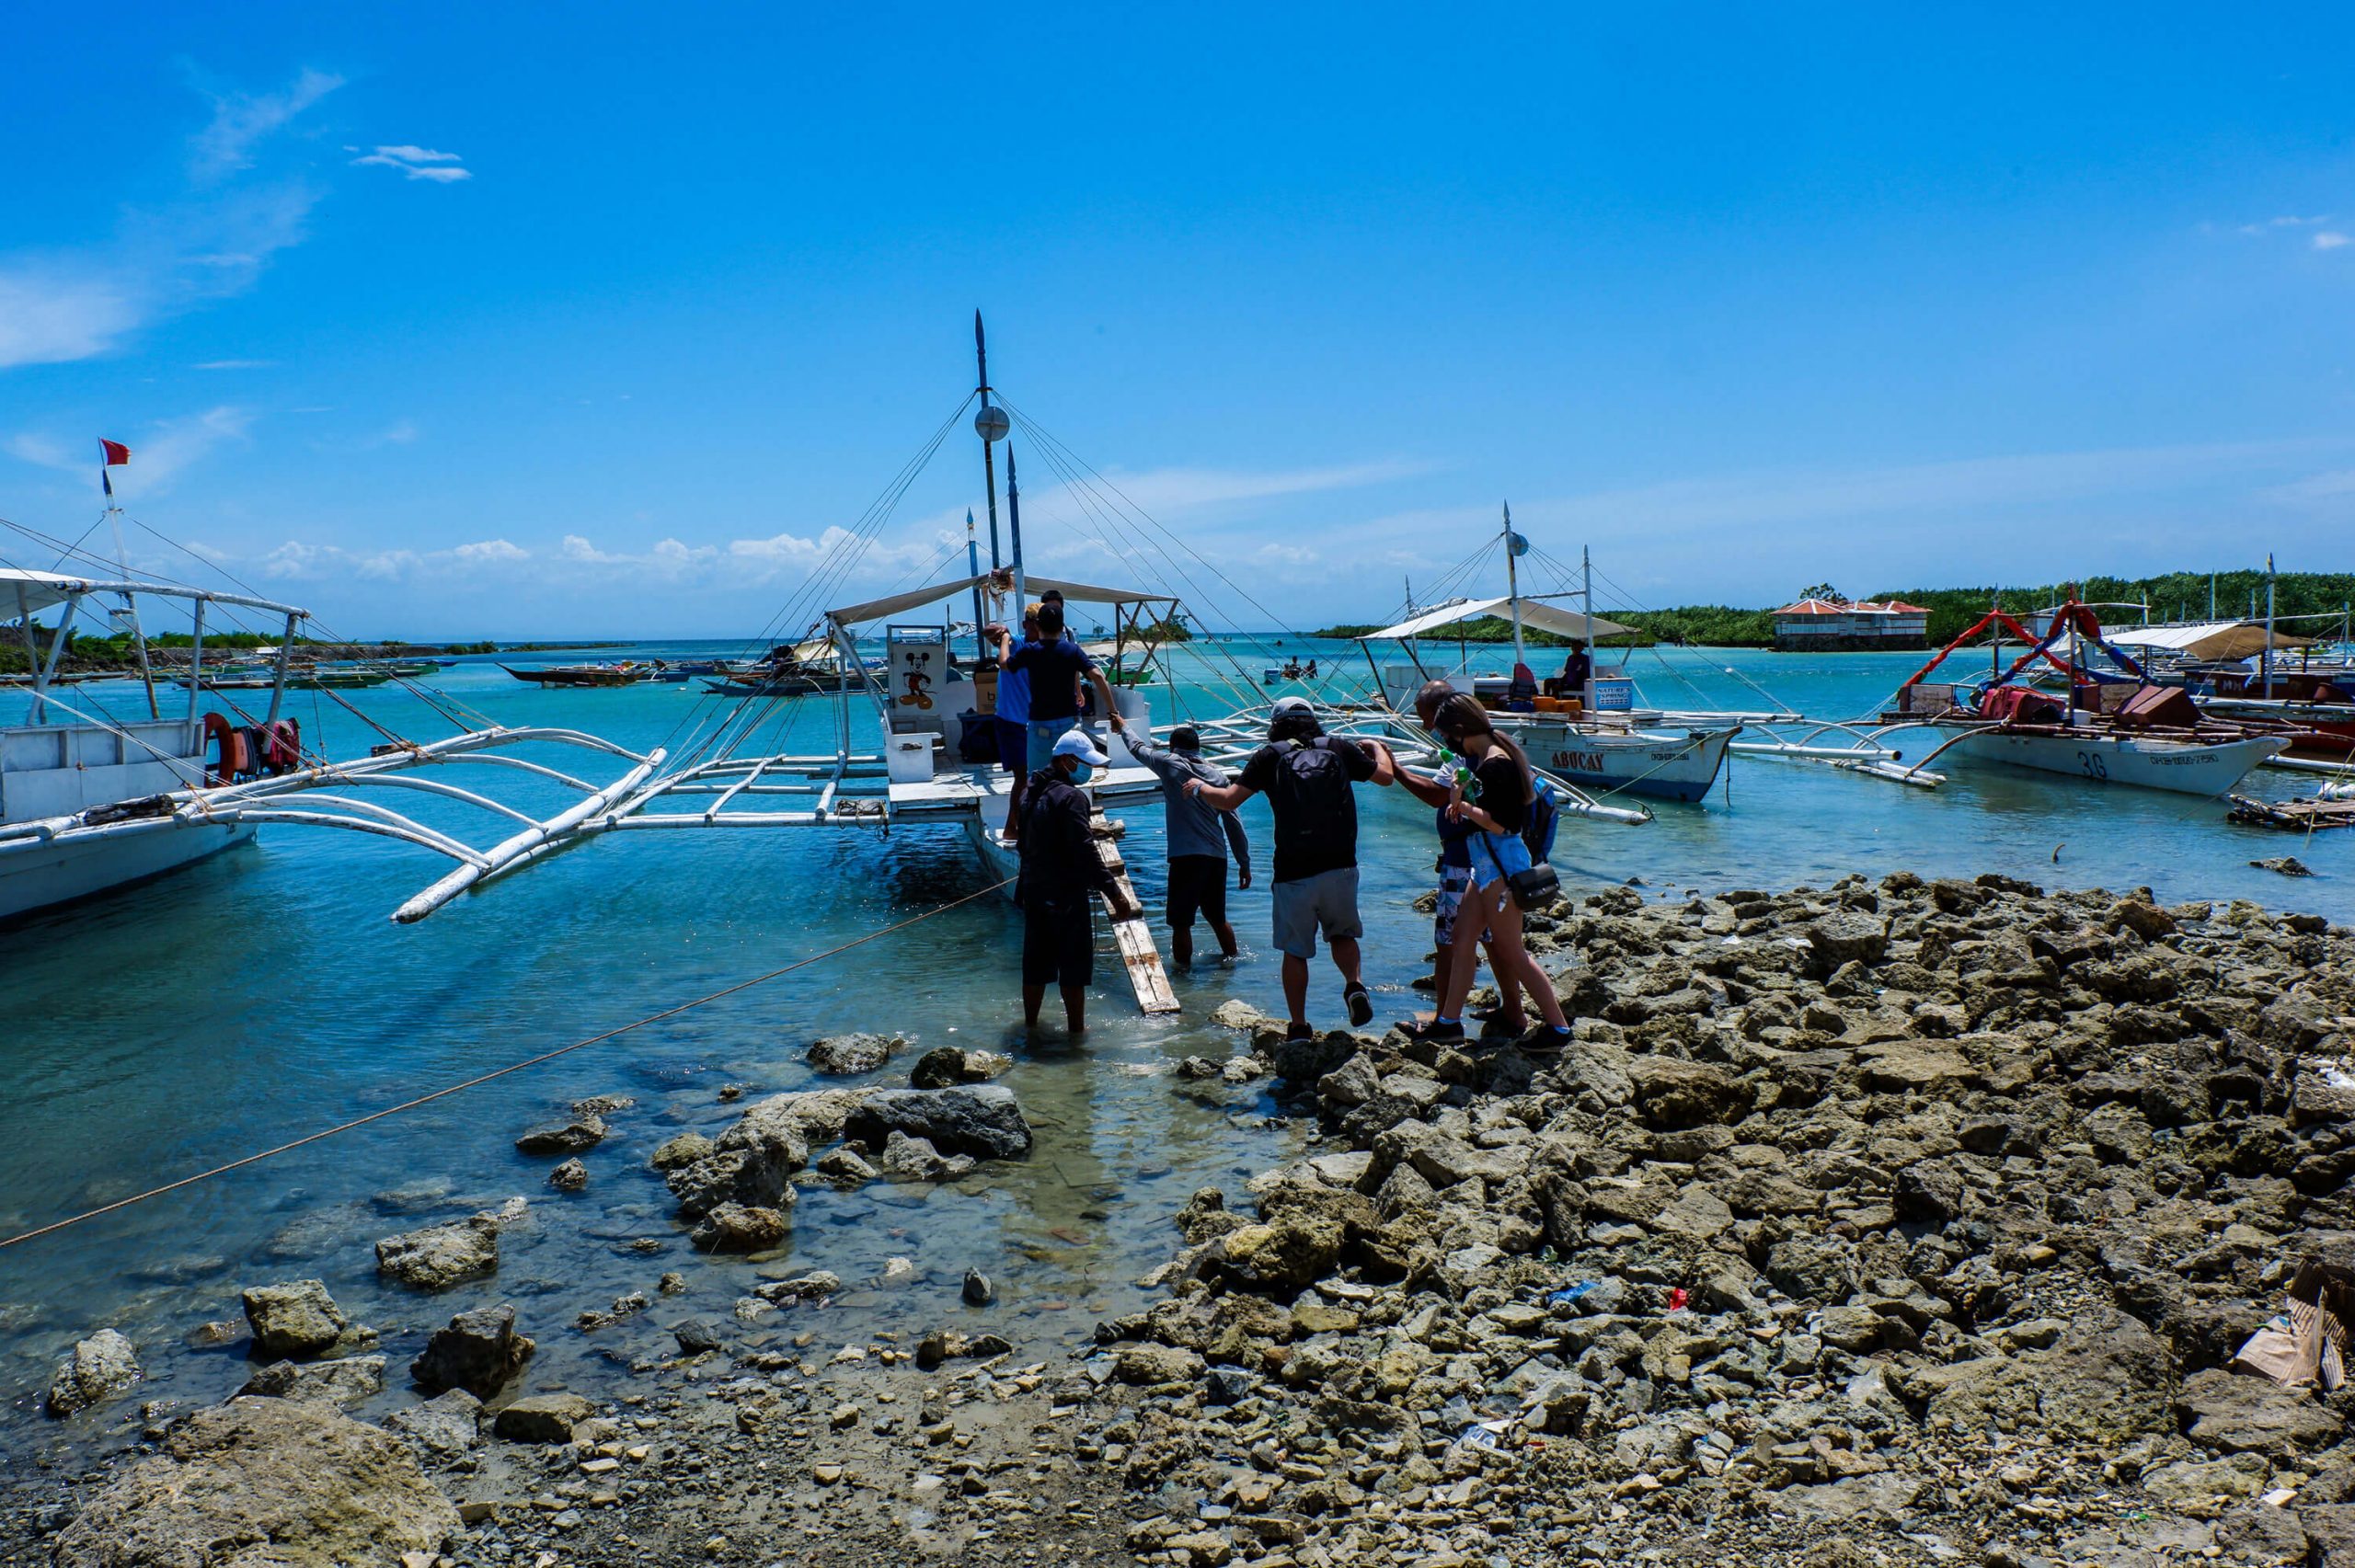 Members of the Central Visayas Information Sharing Network Foundation, Inc. (CVISNet) head to Gilutungan Island for the setup of LACS to power online education in the barangay.